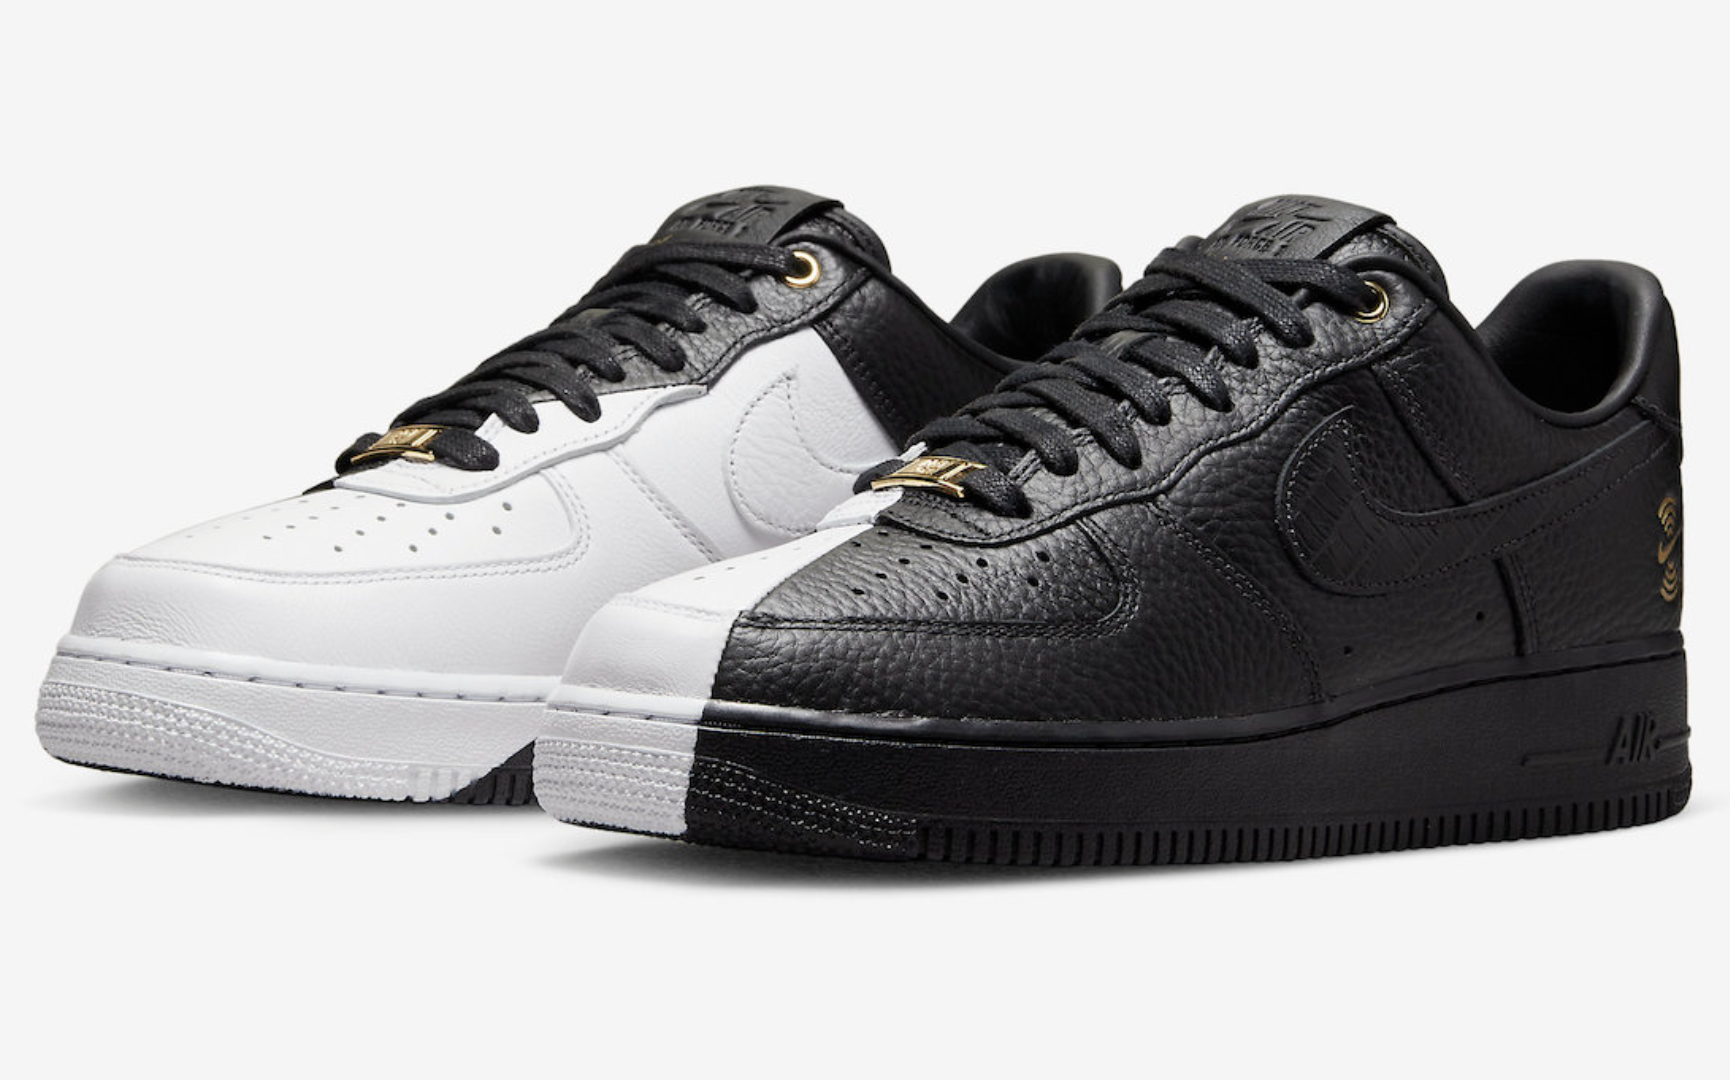 Air Force 1 anniversary edition